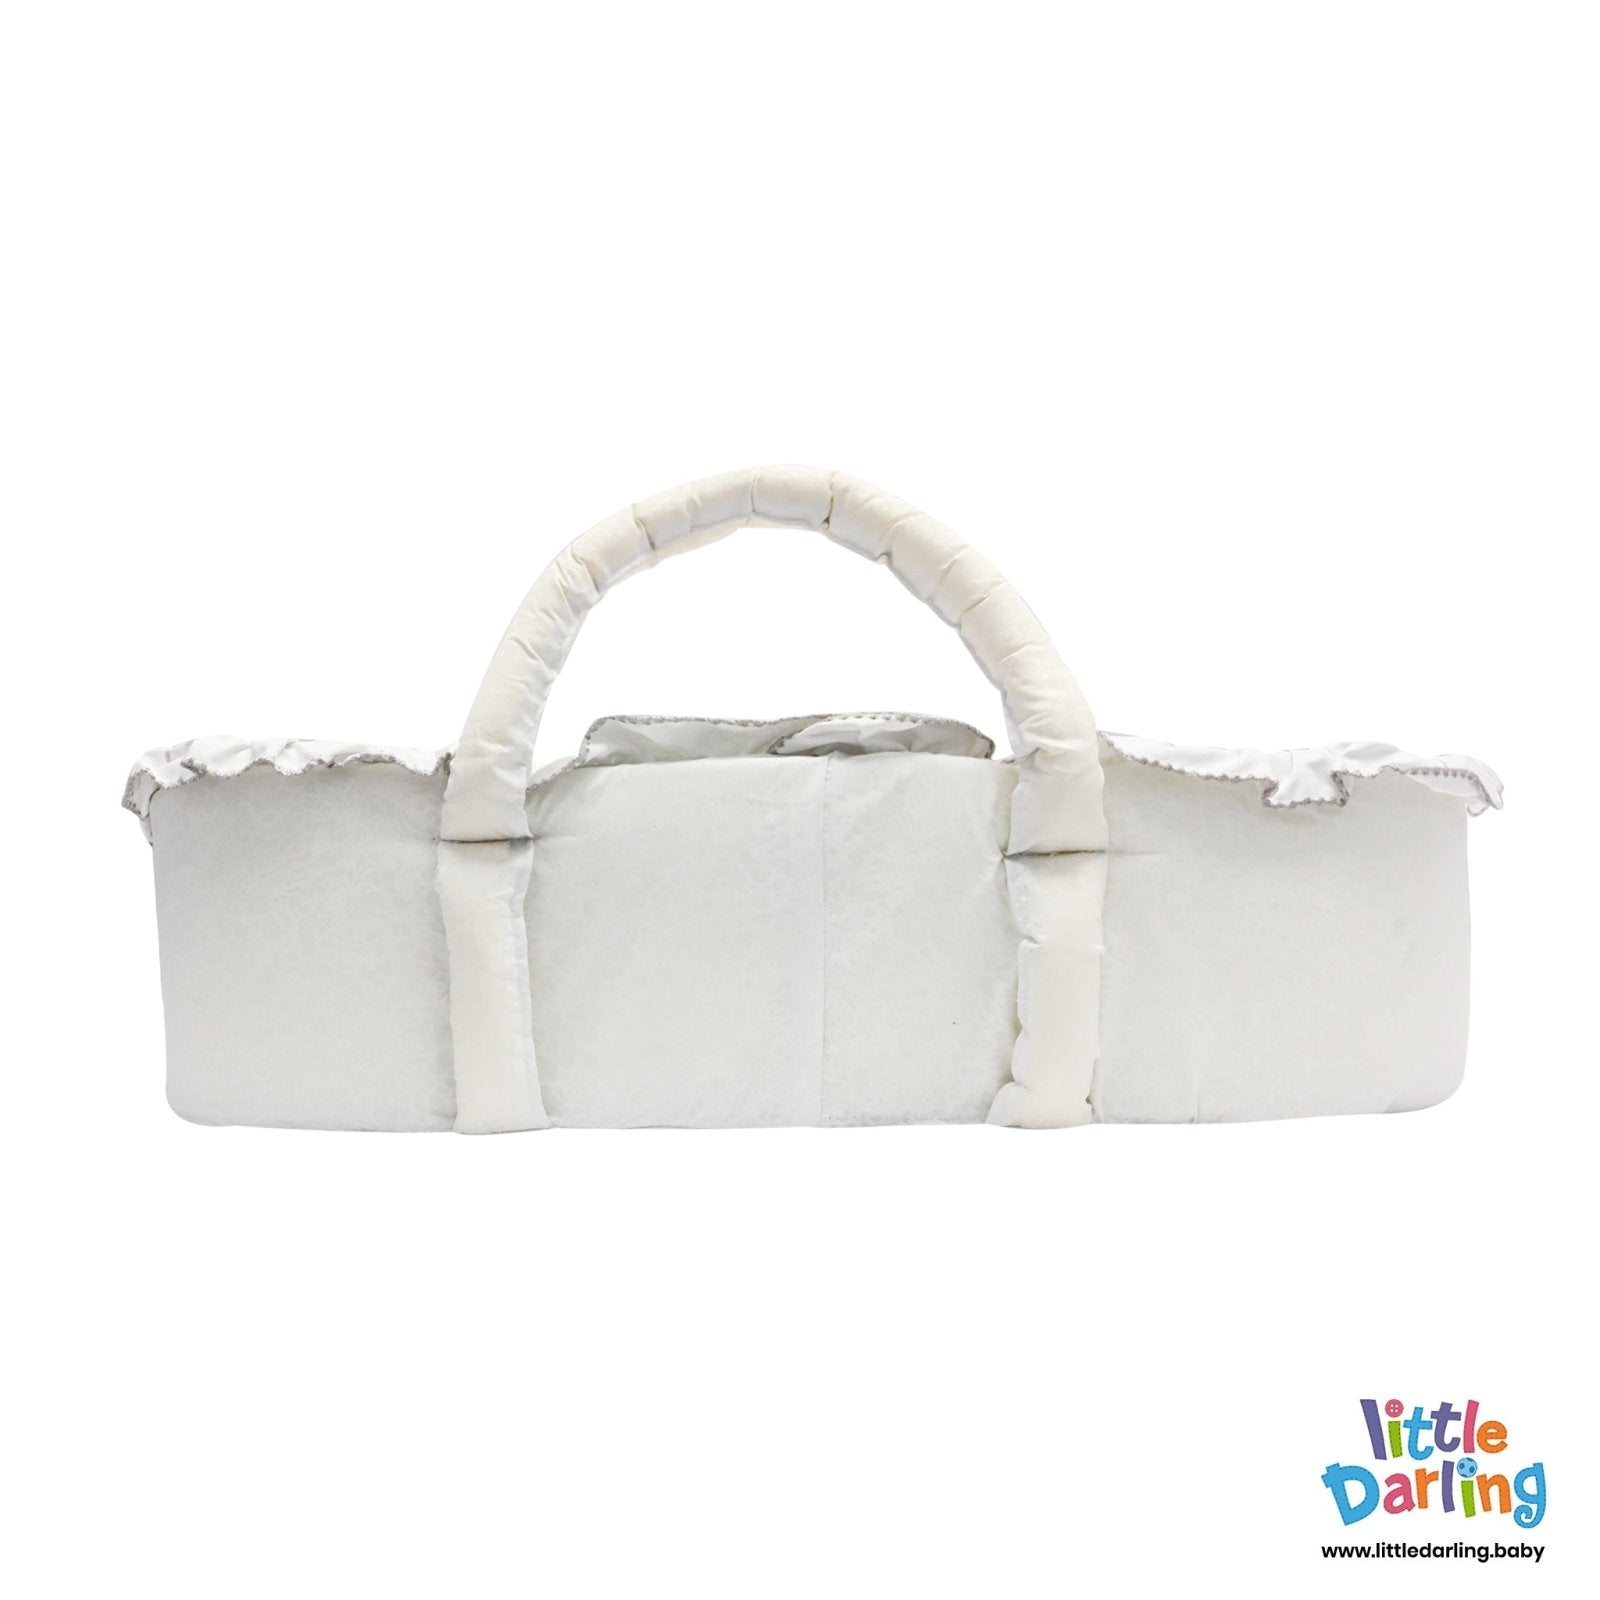 Moses Basket Our Little Princess White Color by Little Darling